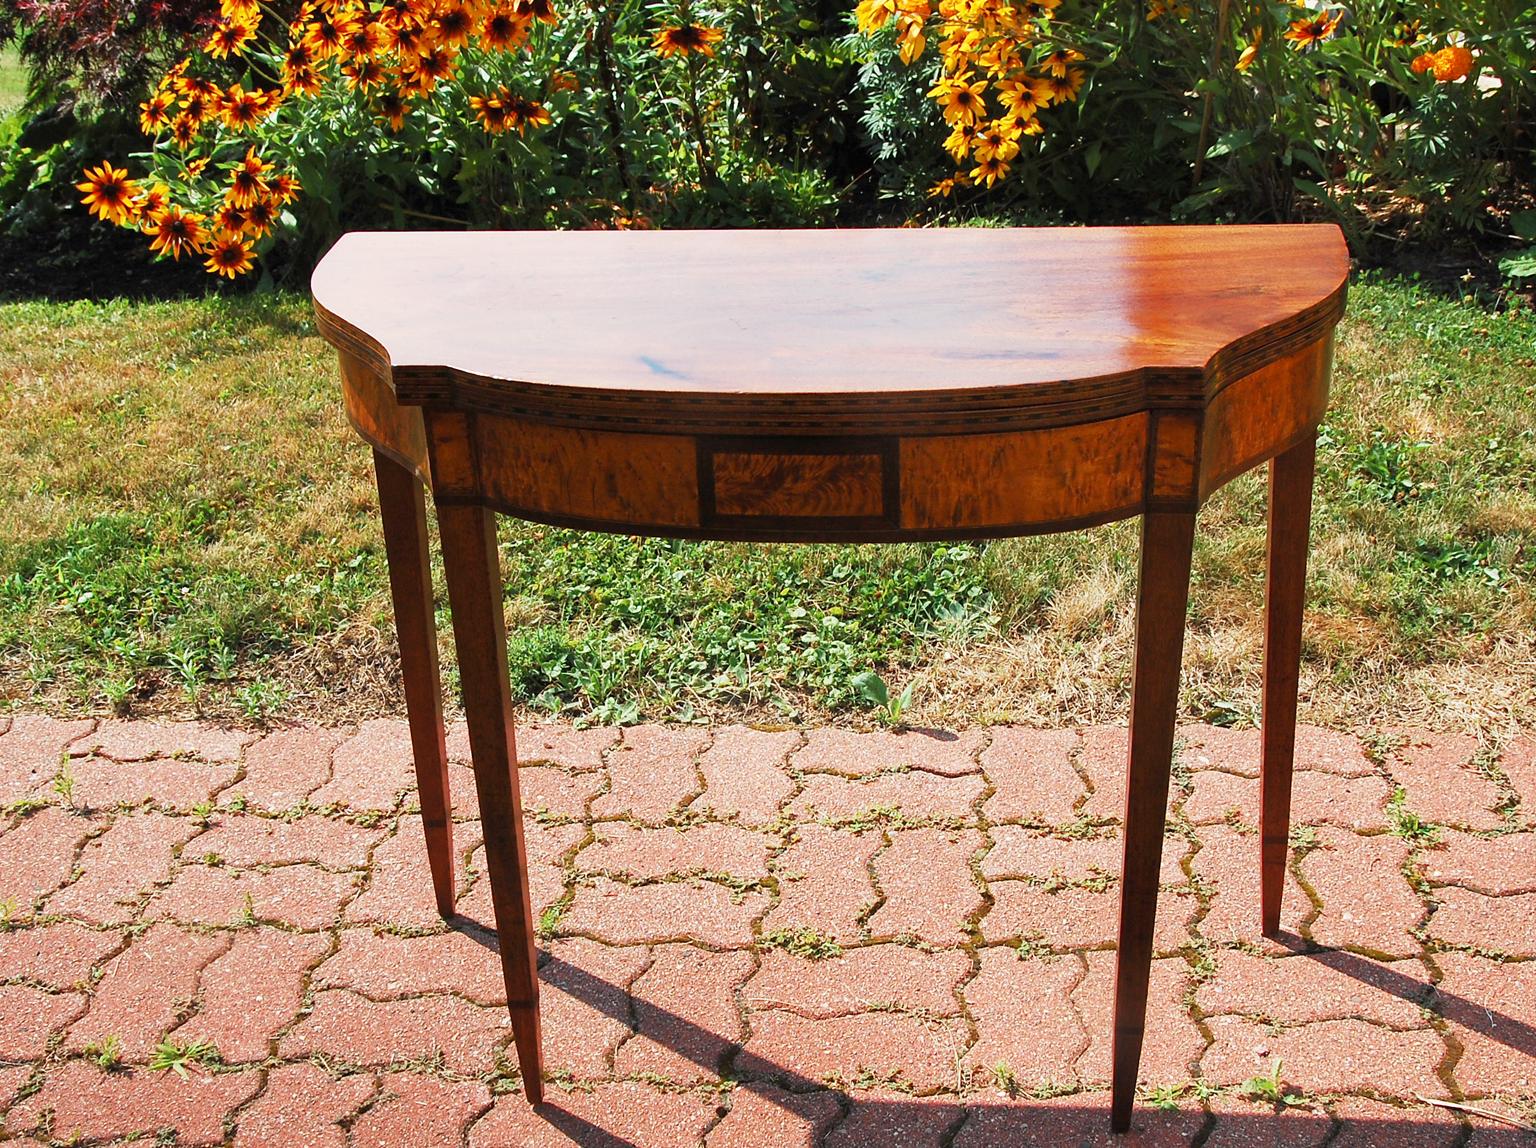 American Federal period serpentine mahogany foldover tea or cardtable. This elegantly shaped table has serpentine sides, leading to a gently bowfront front, the slim tapered legs have an inlaid cuff which marks the change of angle to a sharply